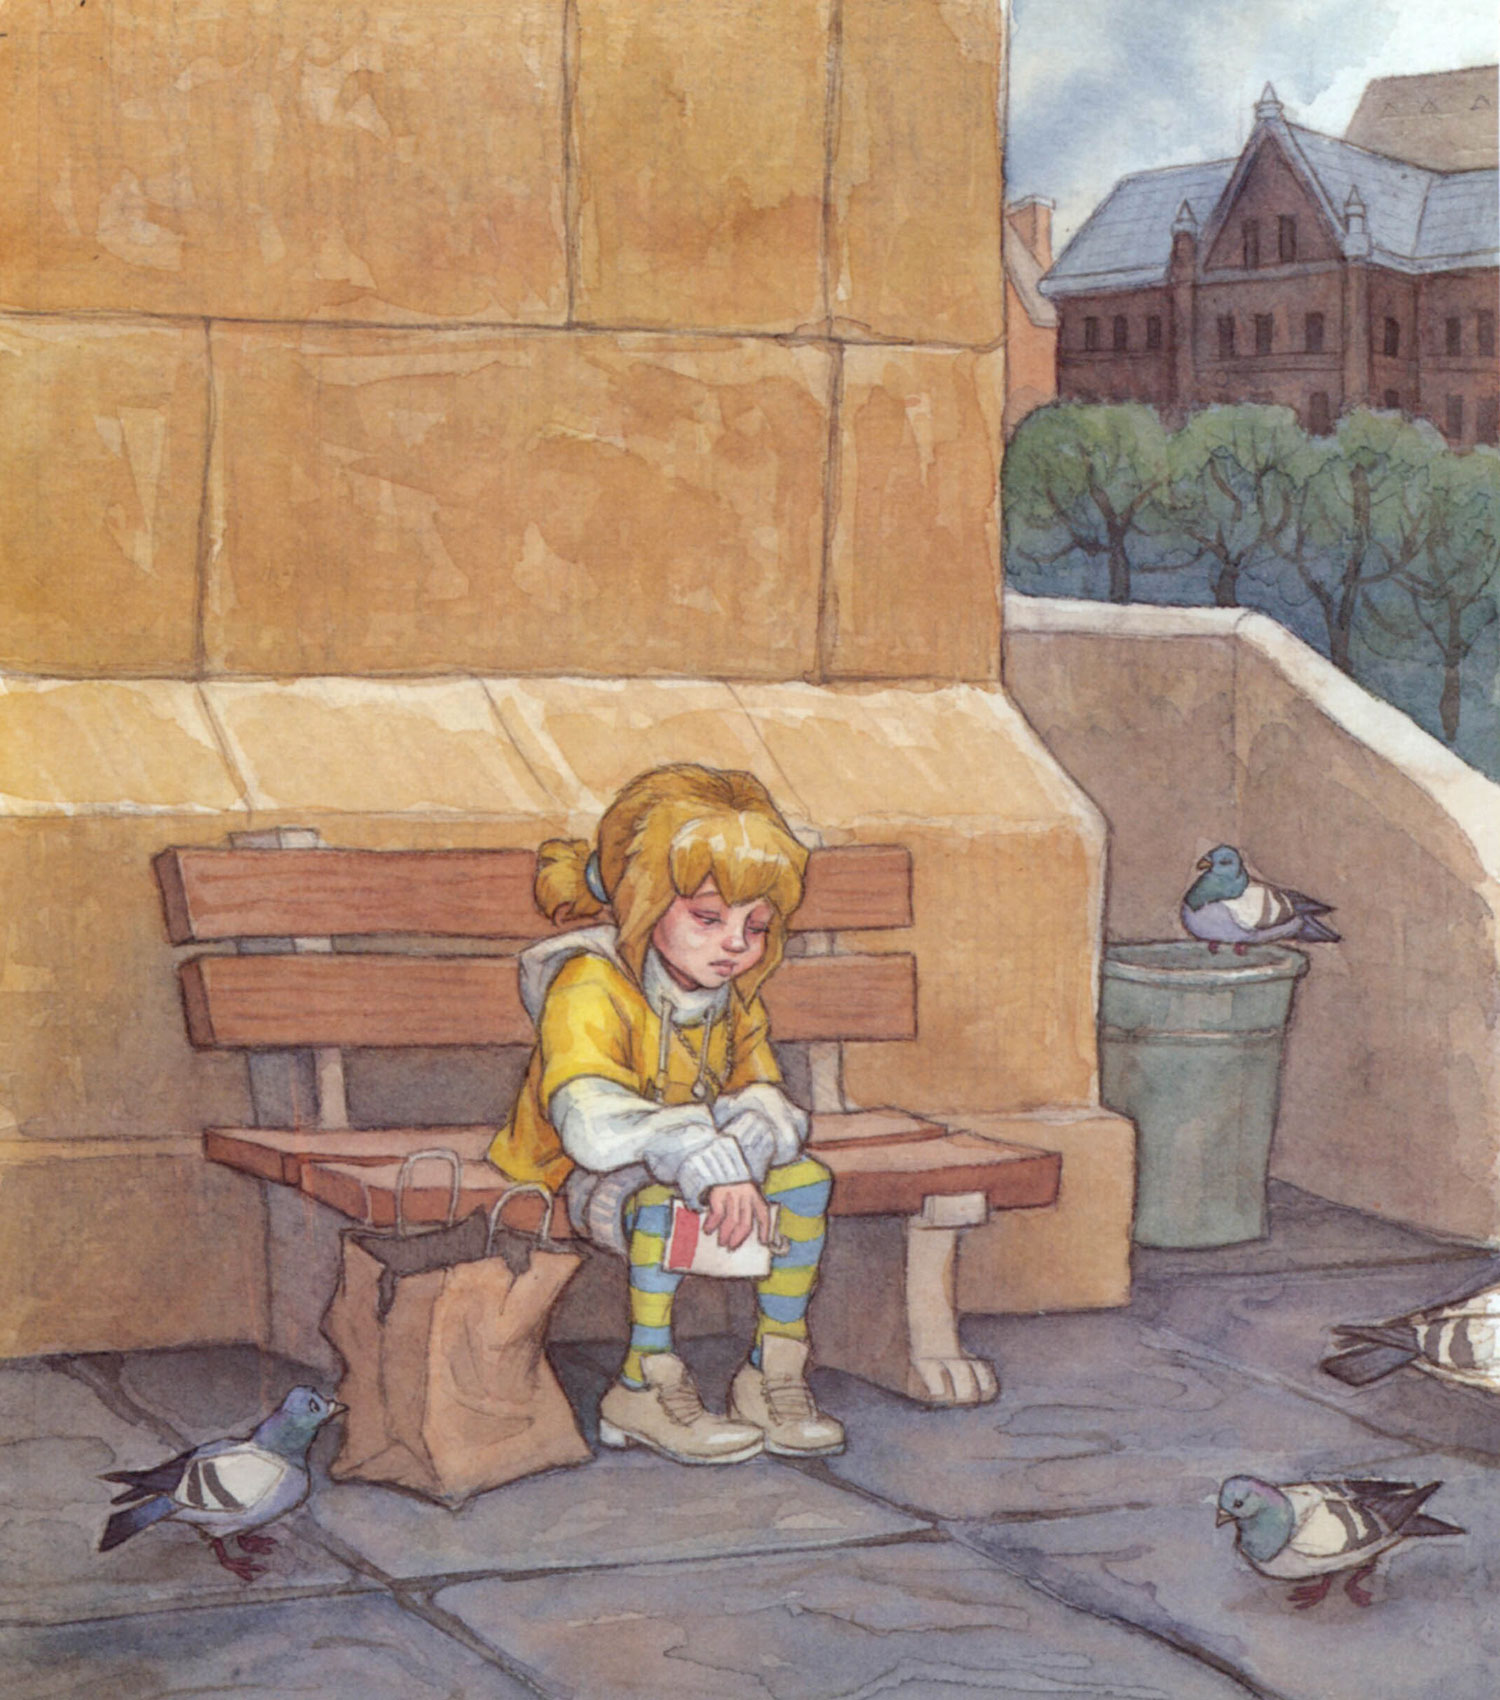   Janey and the Famous Author  Clarion Books, 2005; text by Mary Downing Hahn 